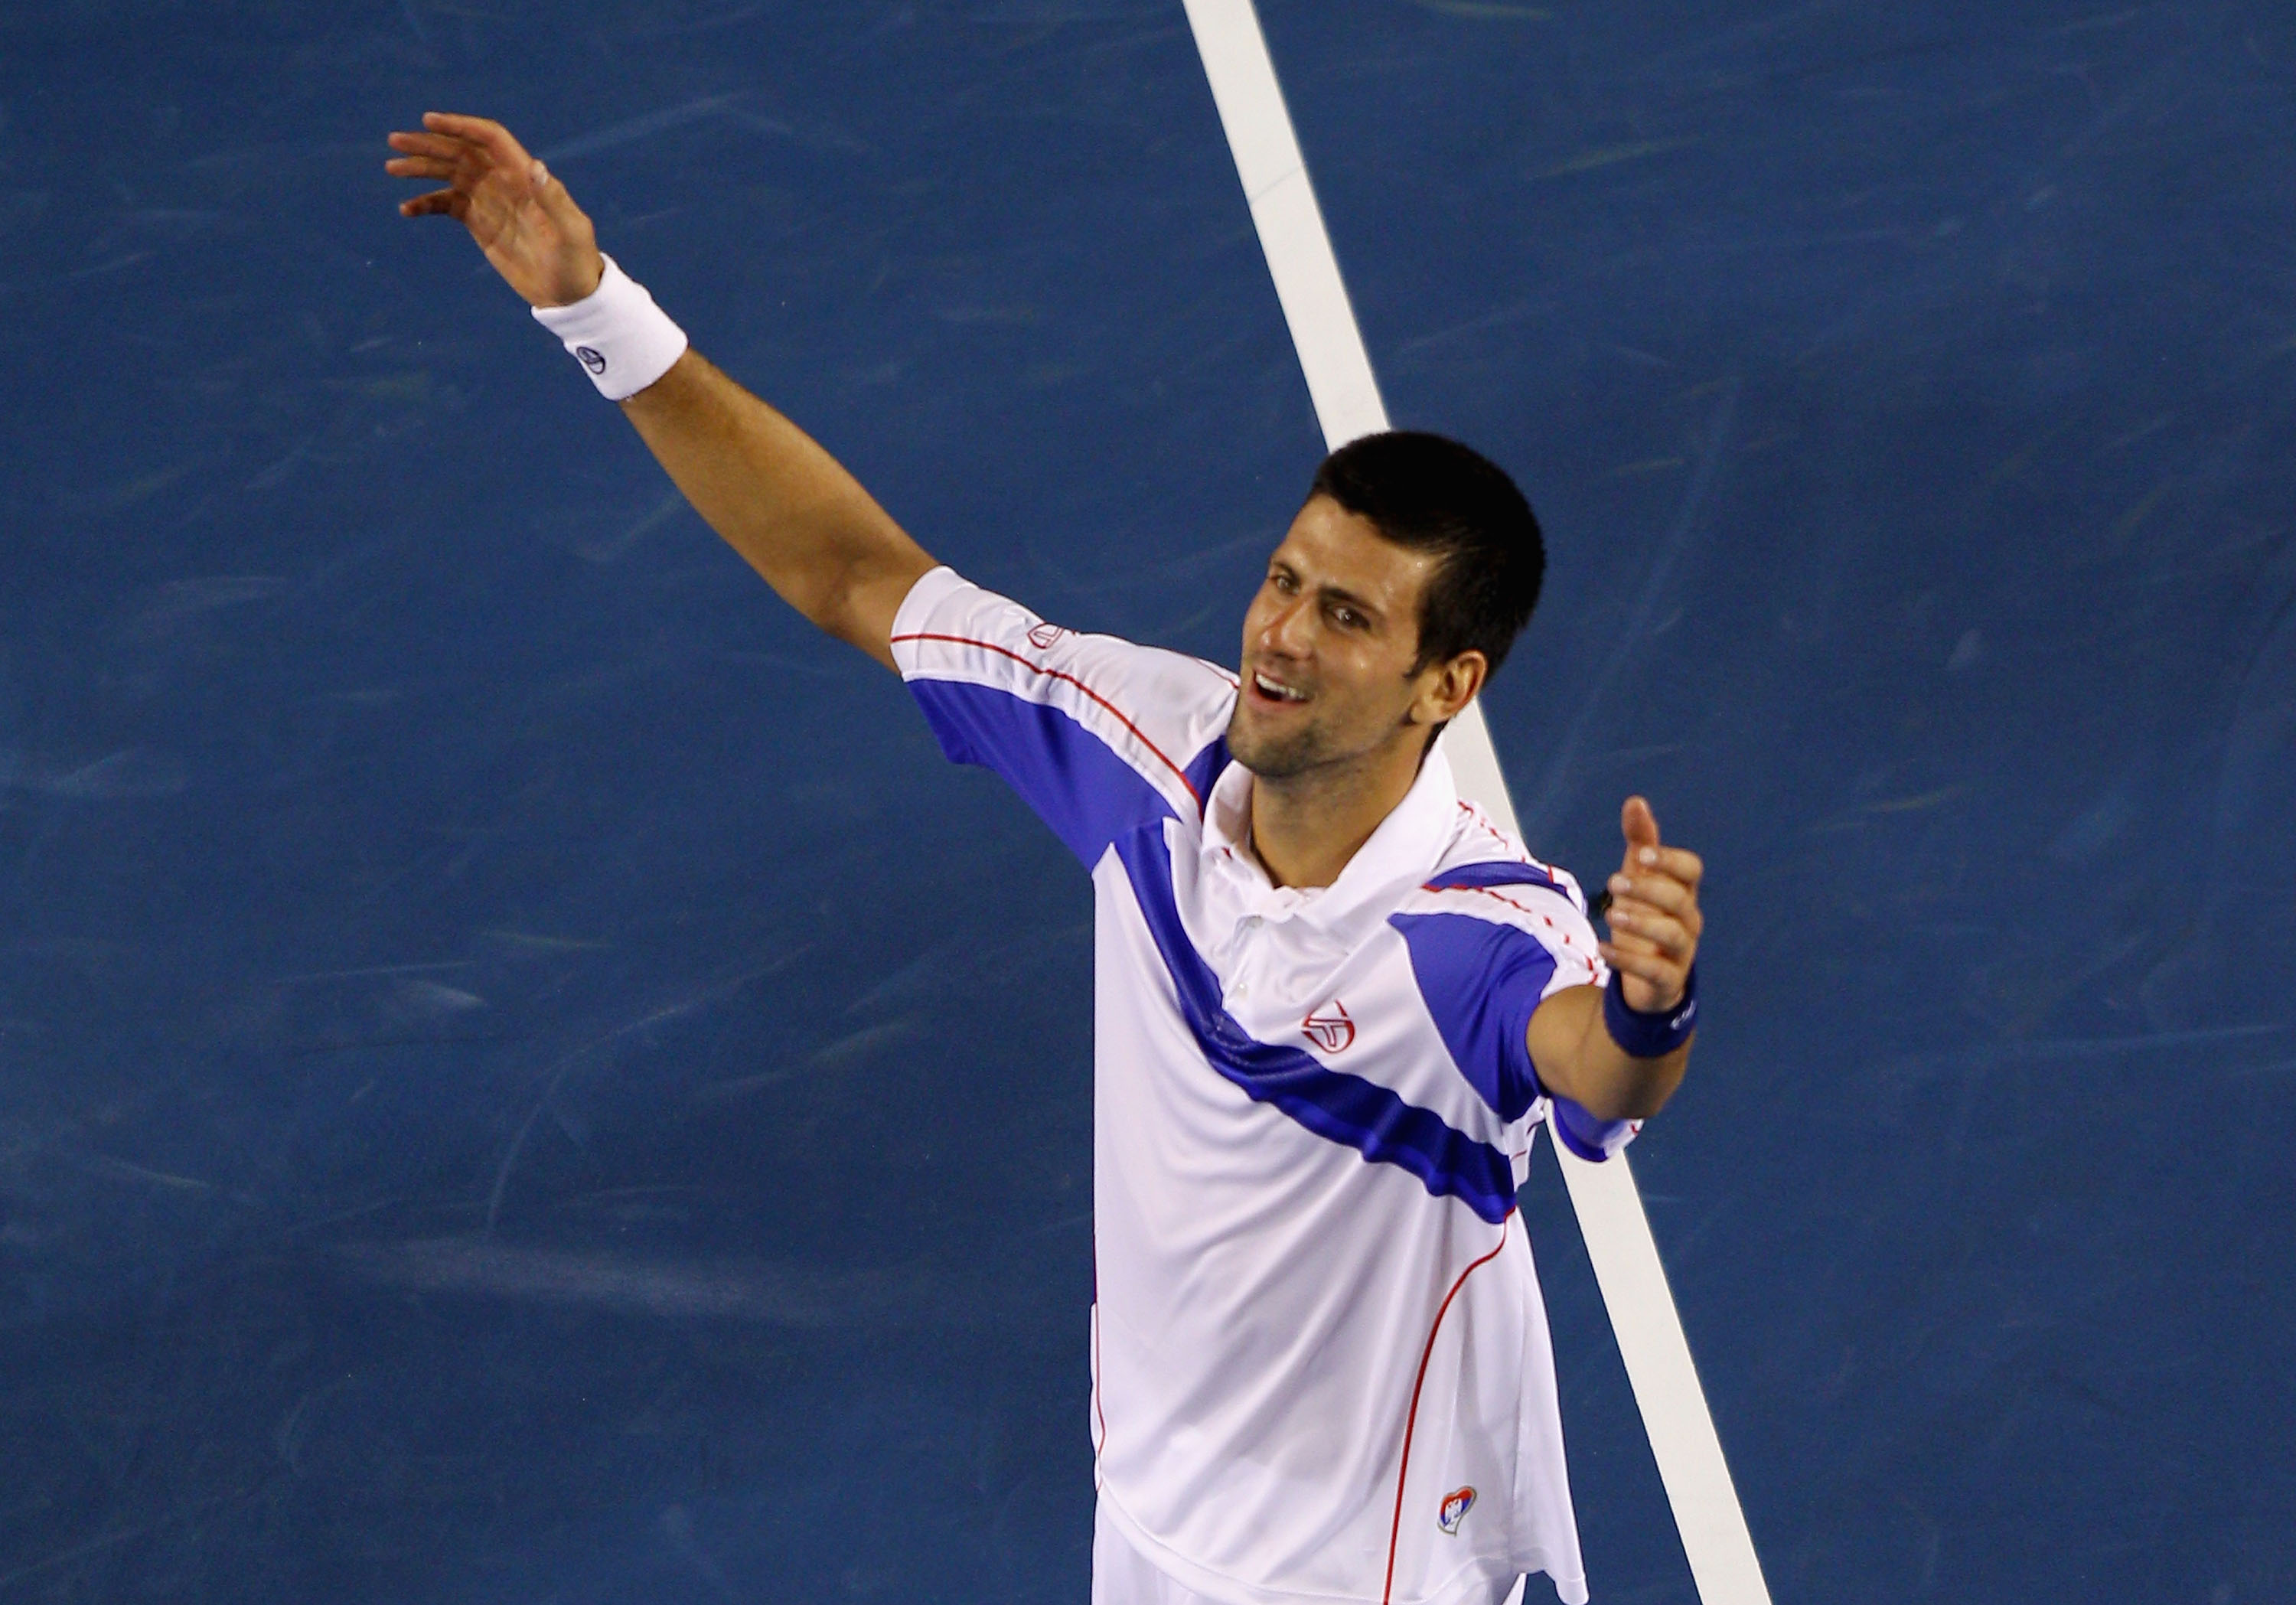 MELBOURNE, AUSTRALIA - JANUARY 30:  Novak Djokovic of Serbia celebrates in his men's final match against Andy Murray of Great Britain during day fourteen of the 2011 Australian Open at Melbourne Park on January 30, 2011 in Melbourne, Australia.  (Photo by